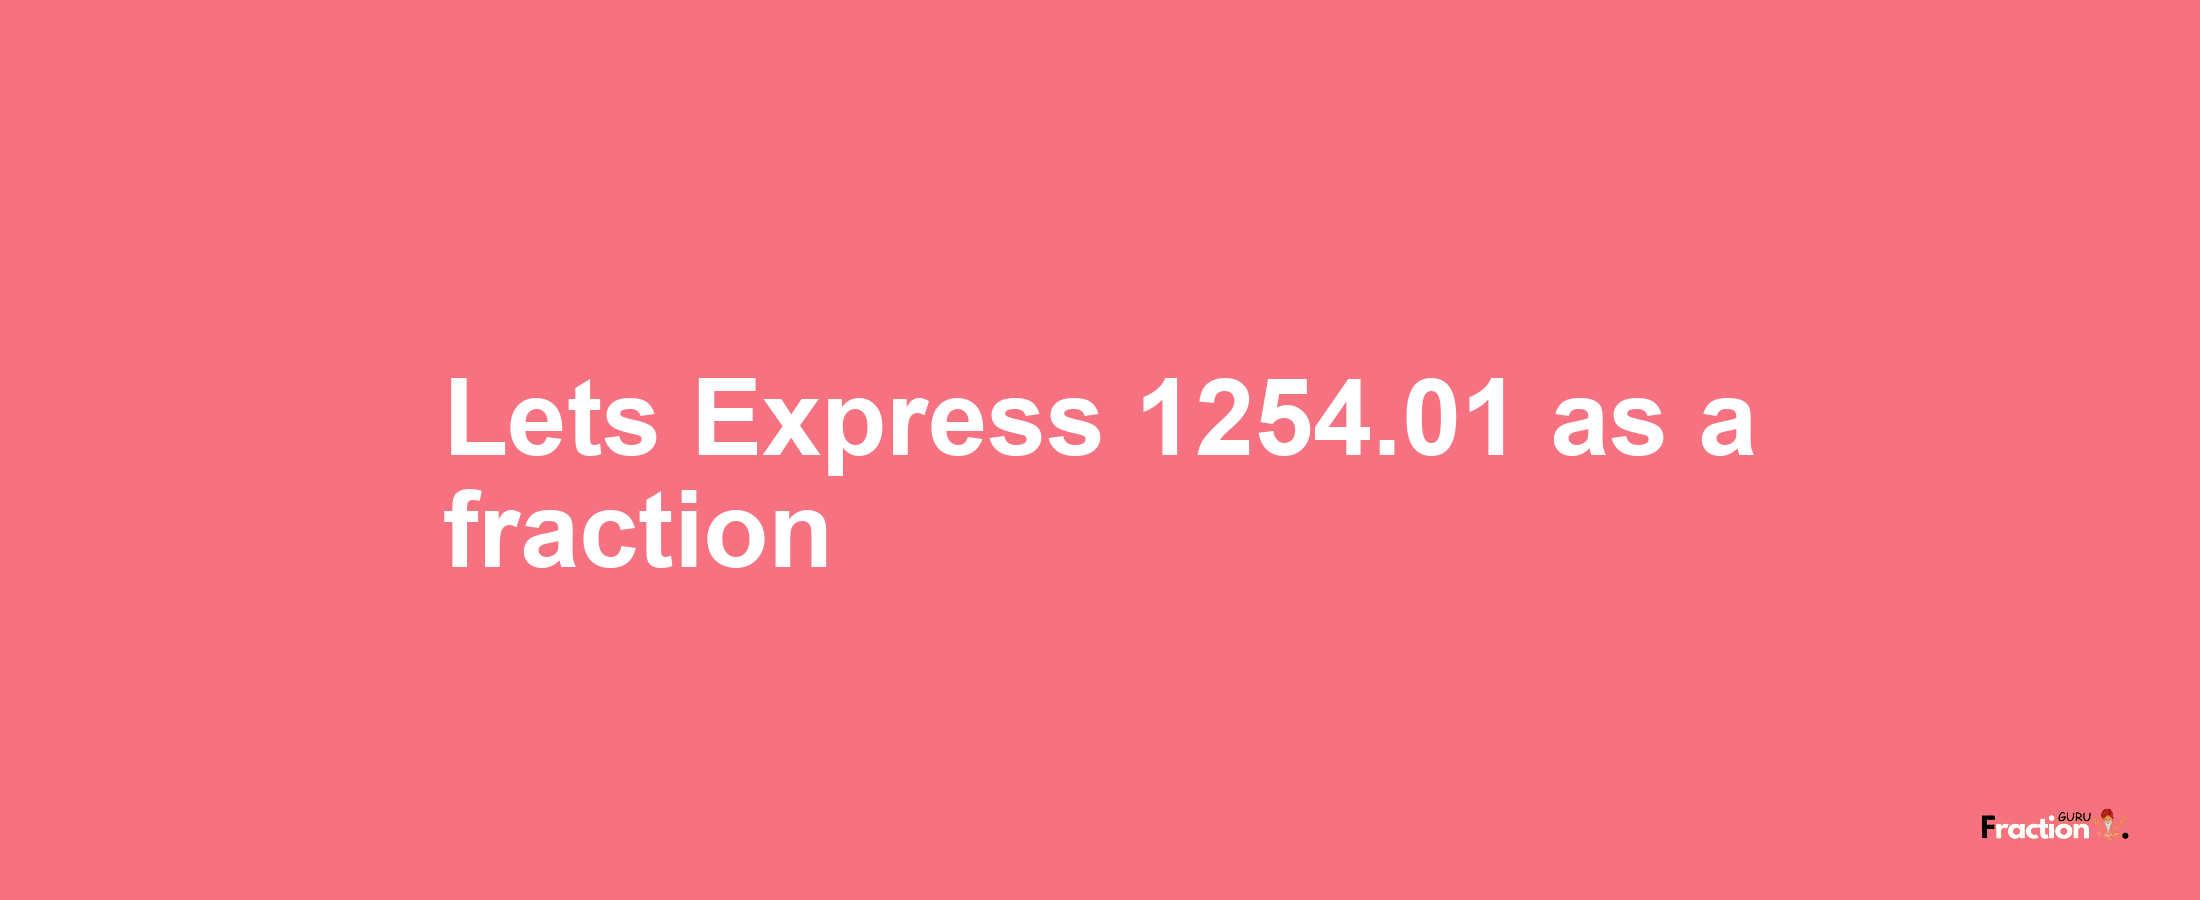 Lets Express 1254.01 as afraction